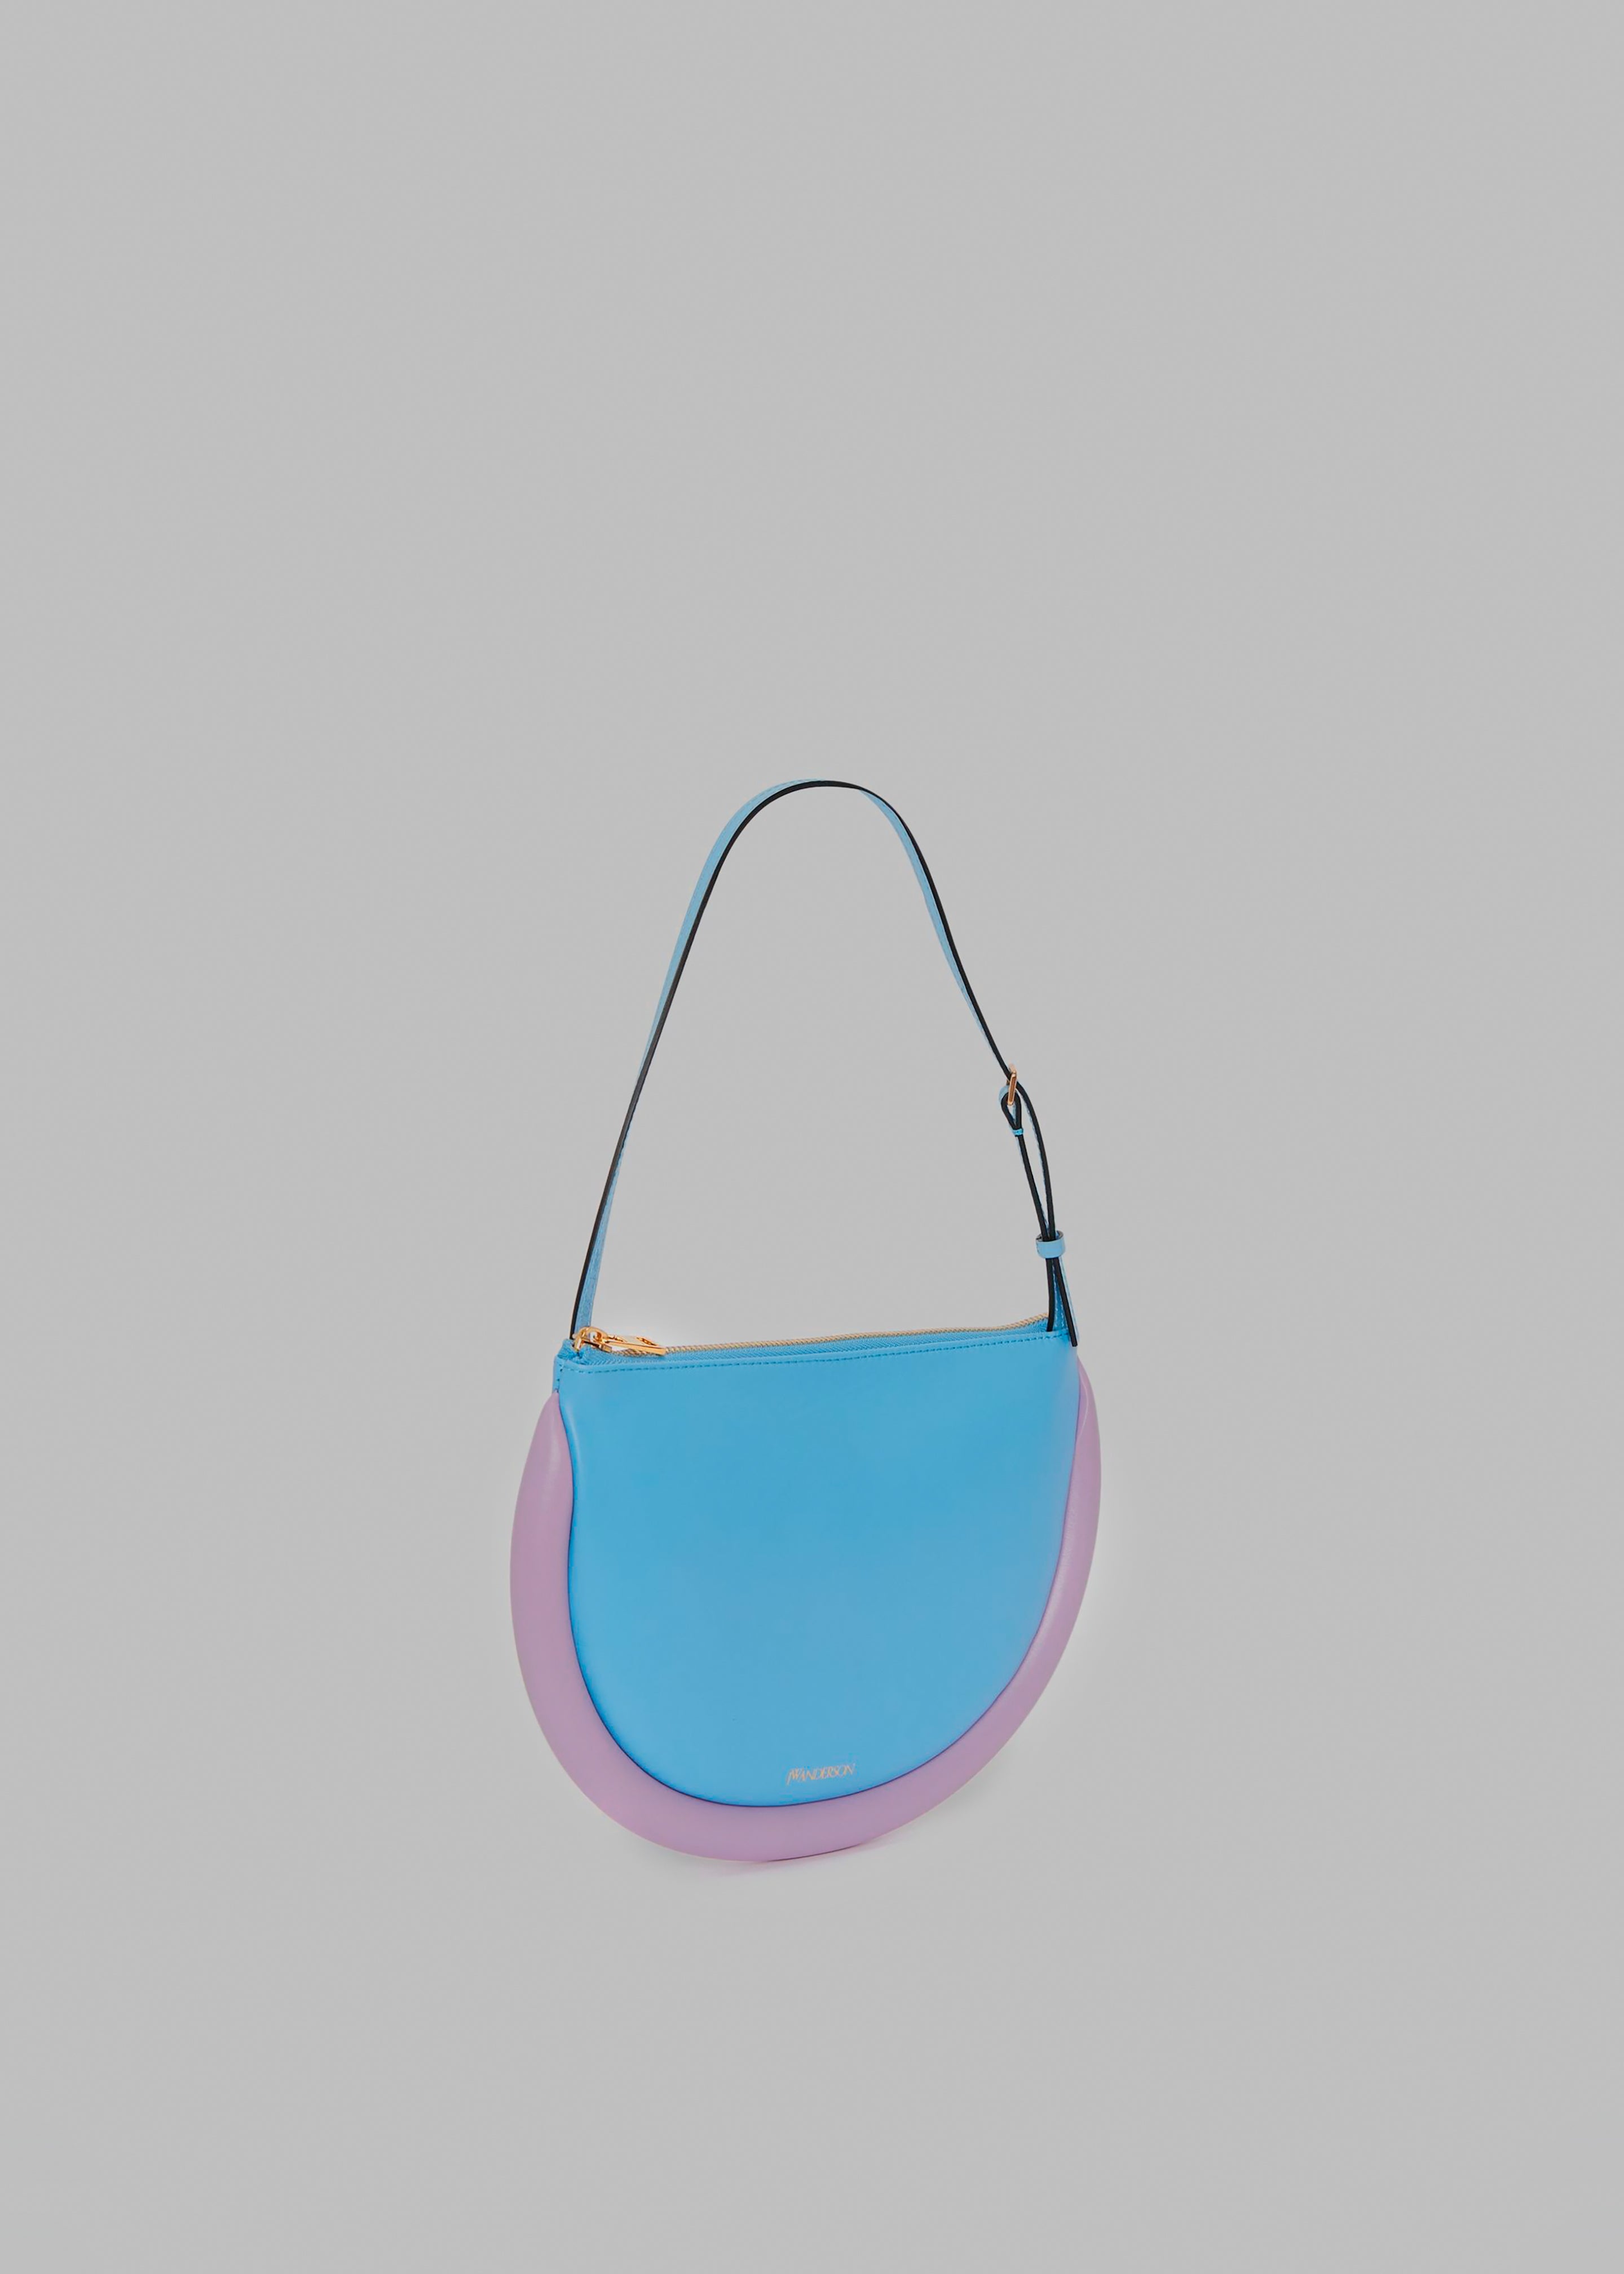 JW Anderson The Bumper Moon - Blue/Lilac - 5